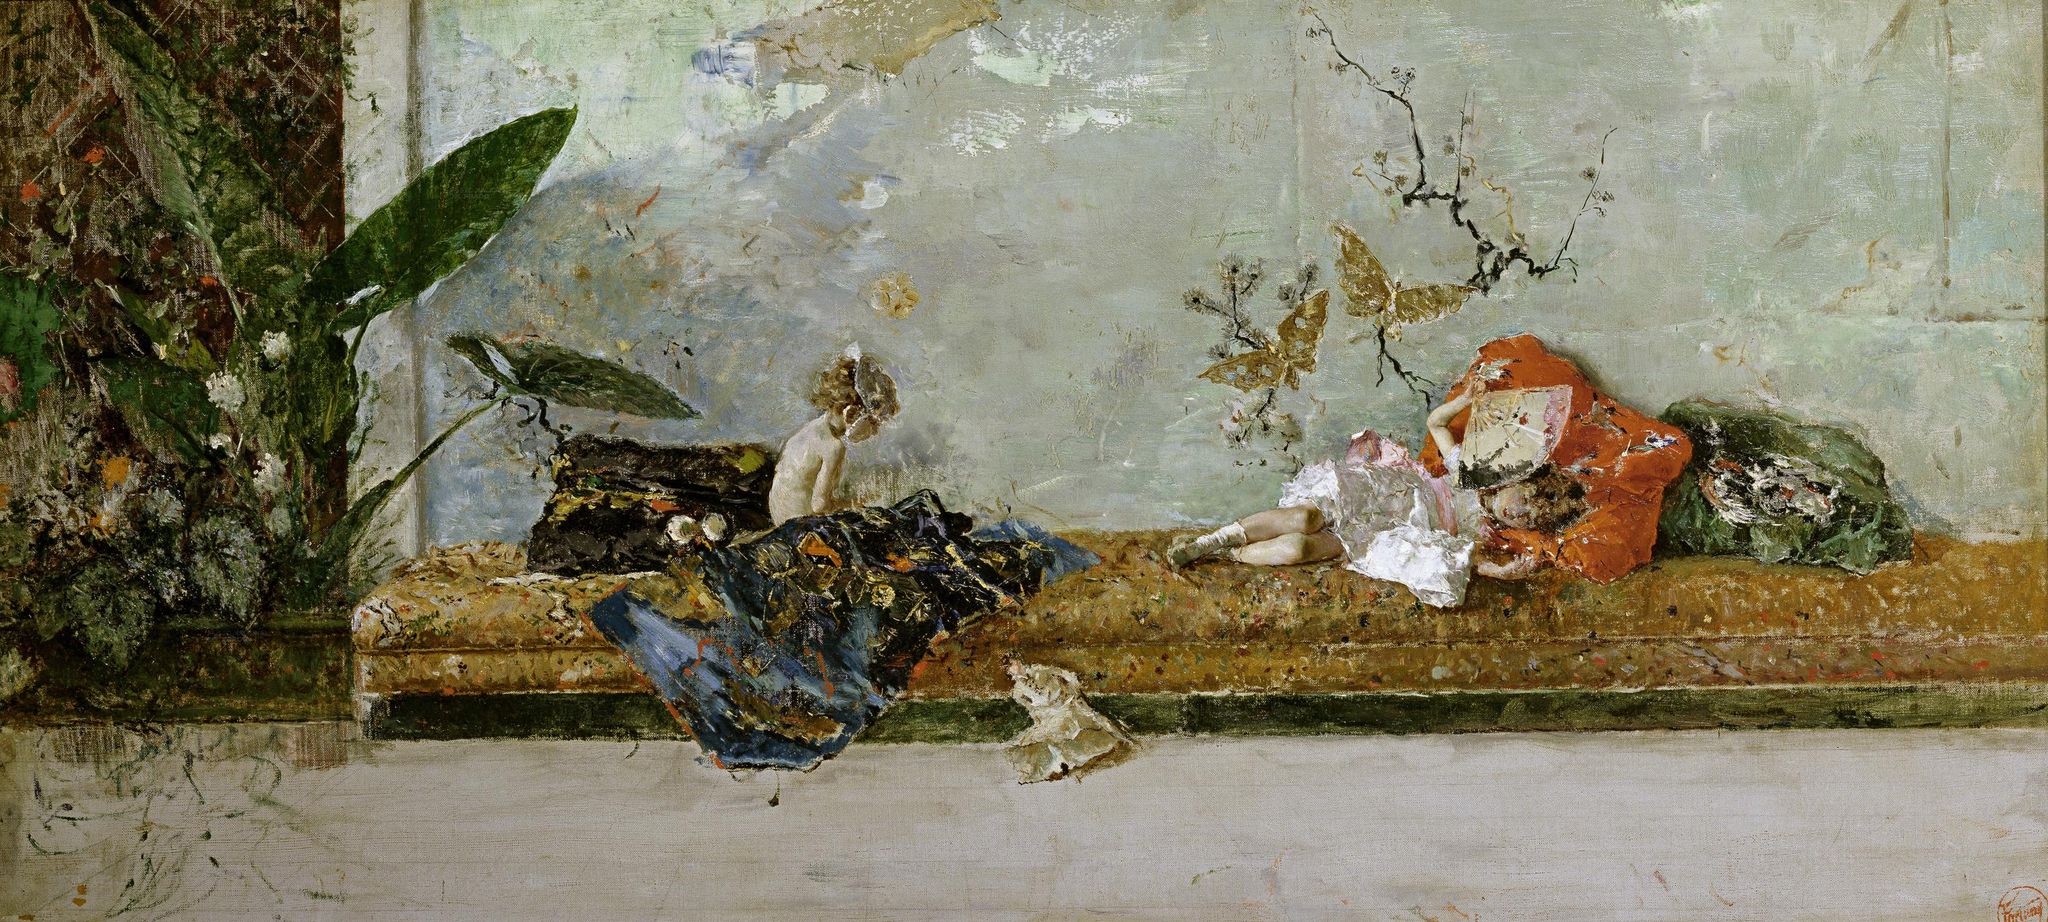 The Painter's Children in the Japanese Room